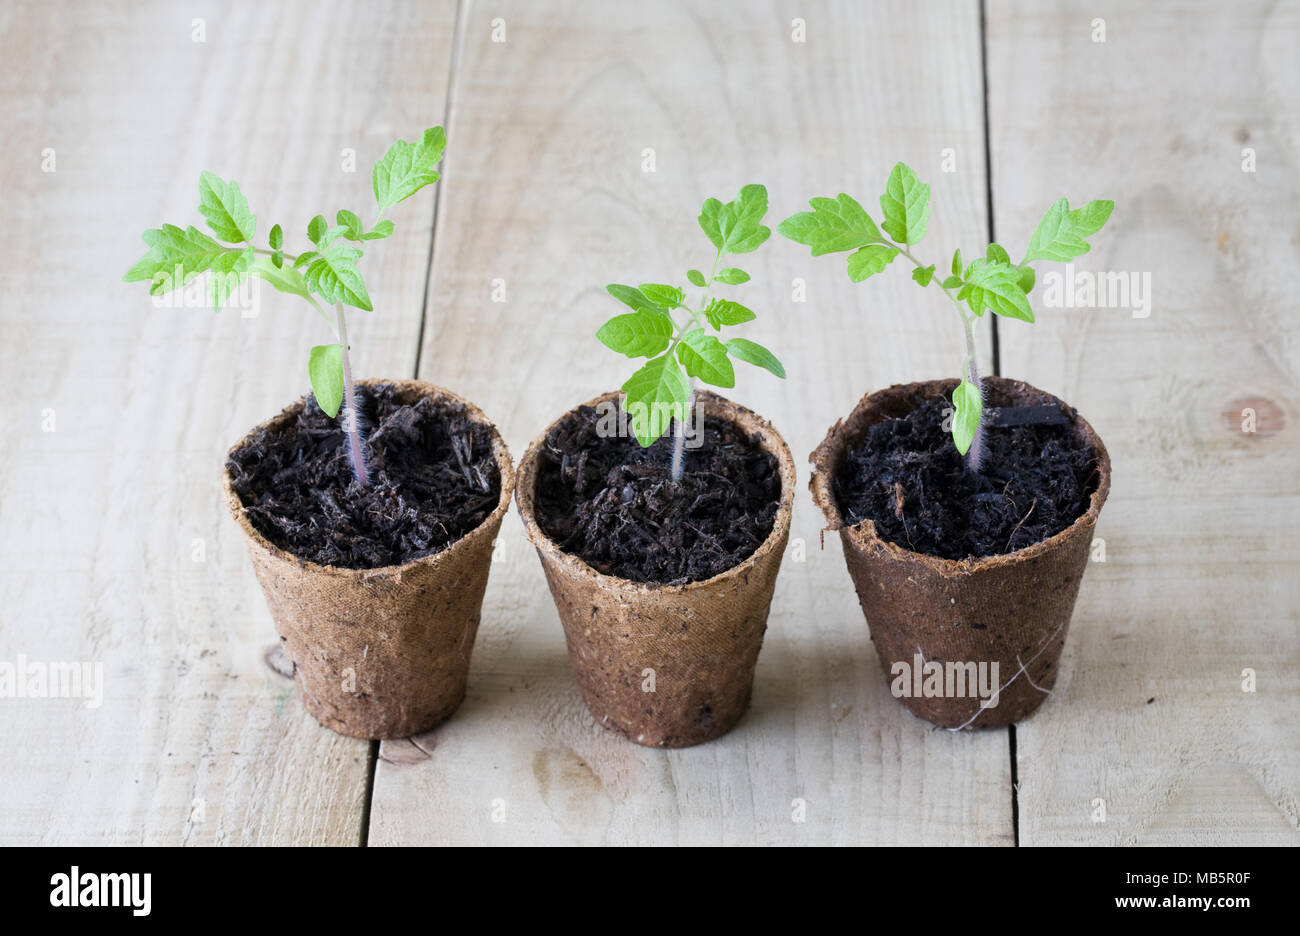 Lycopersicon esculentum.  Tomato seedlings on a wooden background. Stock Photo